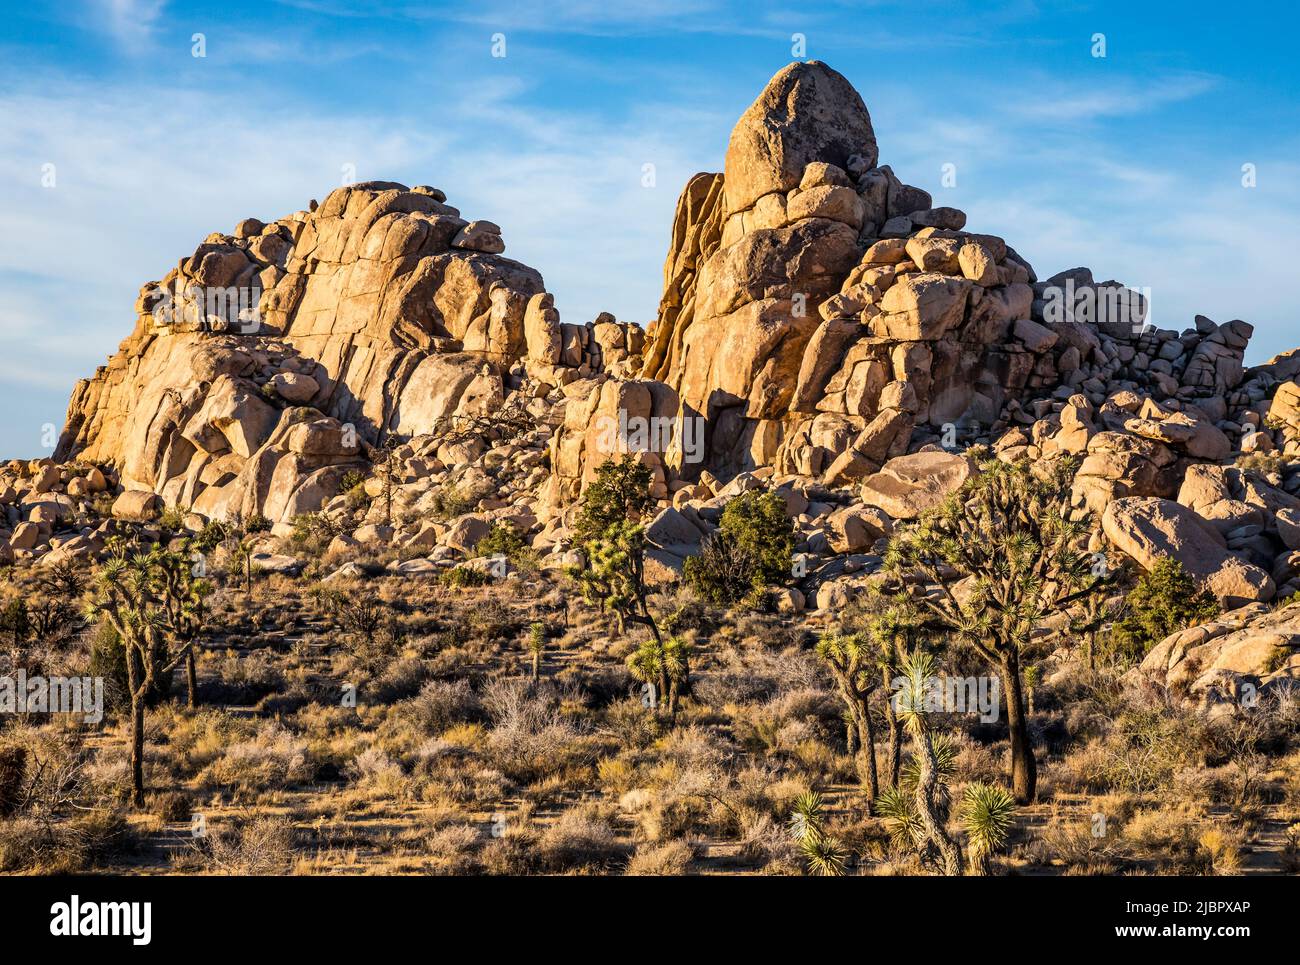 Rock formations in Joshua Tree National Park near sunset. Stock Photo